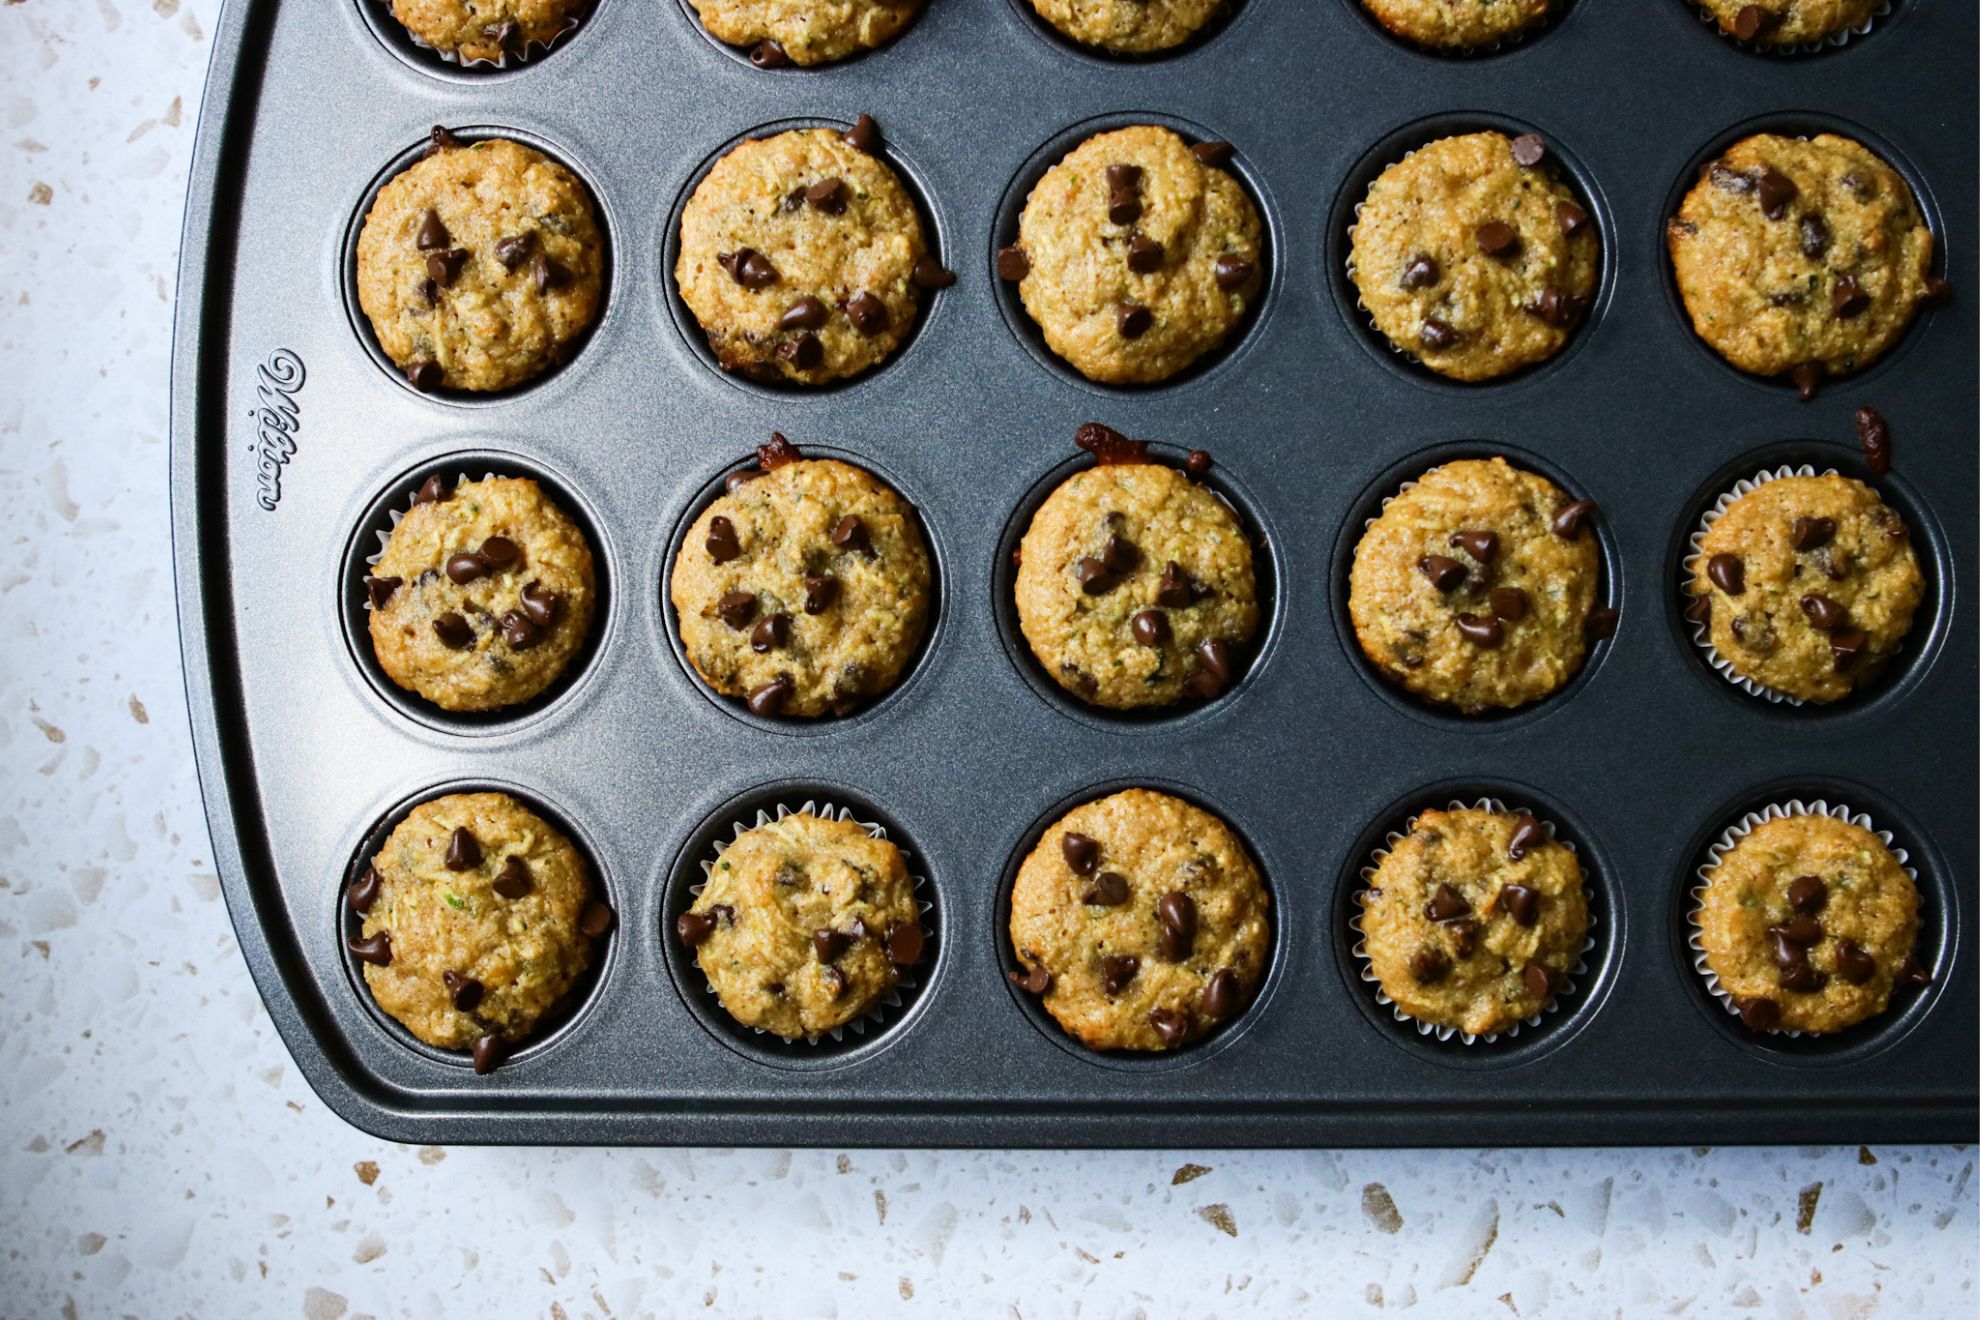 This is an overhead horizontal image of a dark grey mini muffin tin with baked muffins in it. On top of the muffins are mini chocolate chips. The muffin pan sits on a white terrazzo surface.